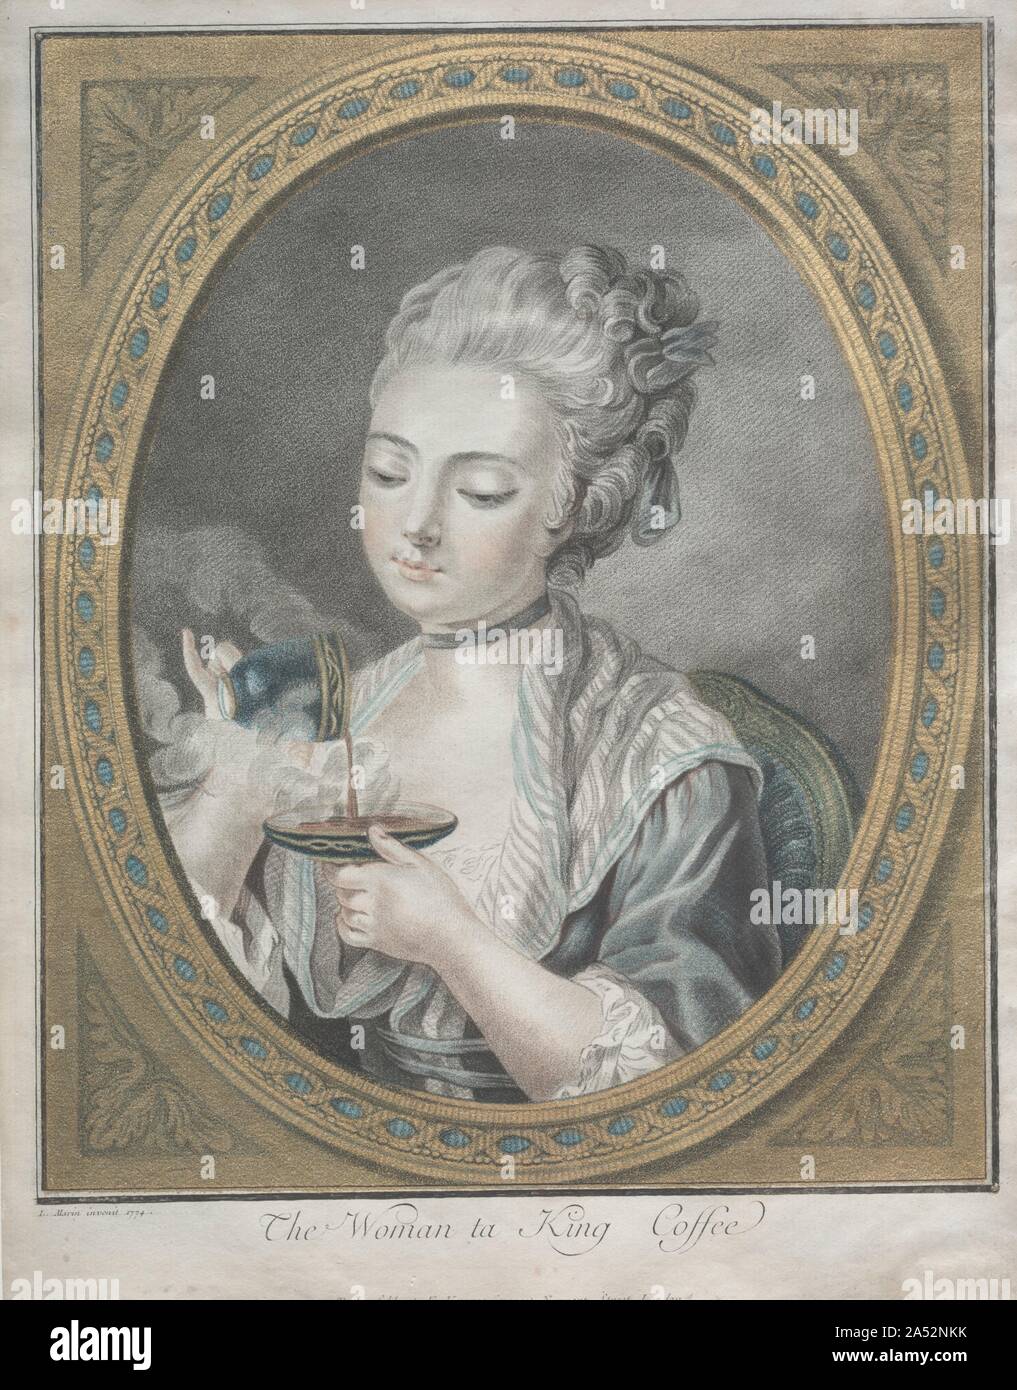 The Woman taking Coffee, 1774. In his quest to emulate fashionable drawings for display, Bonnet developed a method for printing gold frames. After preparing the paper with printed layers of lead white and a red adhesive compound called a mordant, Bonnet hand-applied gold leaf, on top of which he printed ornamental patterns. Because French regulations restricted the use of gold to certain artisans, like furniture builders, Bonnet disguised these prints as English imports. He sold them from a shop called  Au Magasin Anglois  (From the English Shop) and even advertised the fictional name &quot;Le Stock Photo